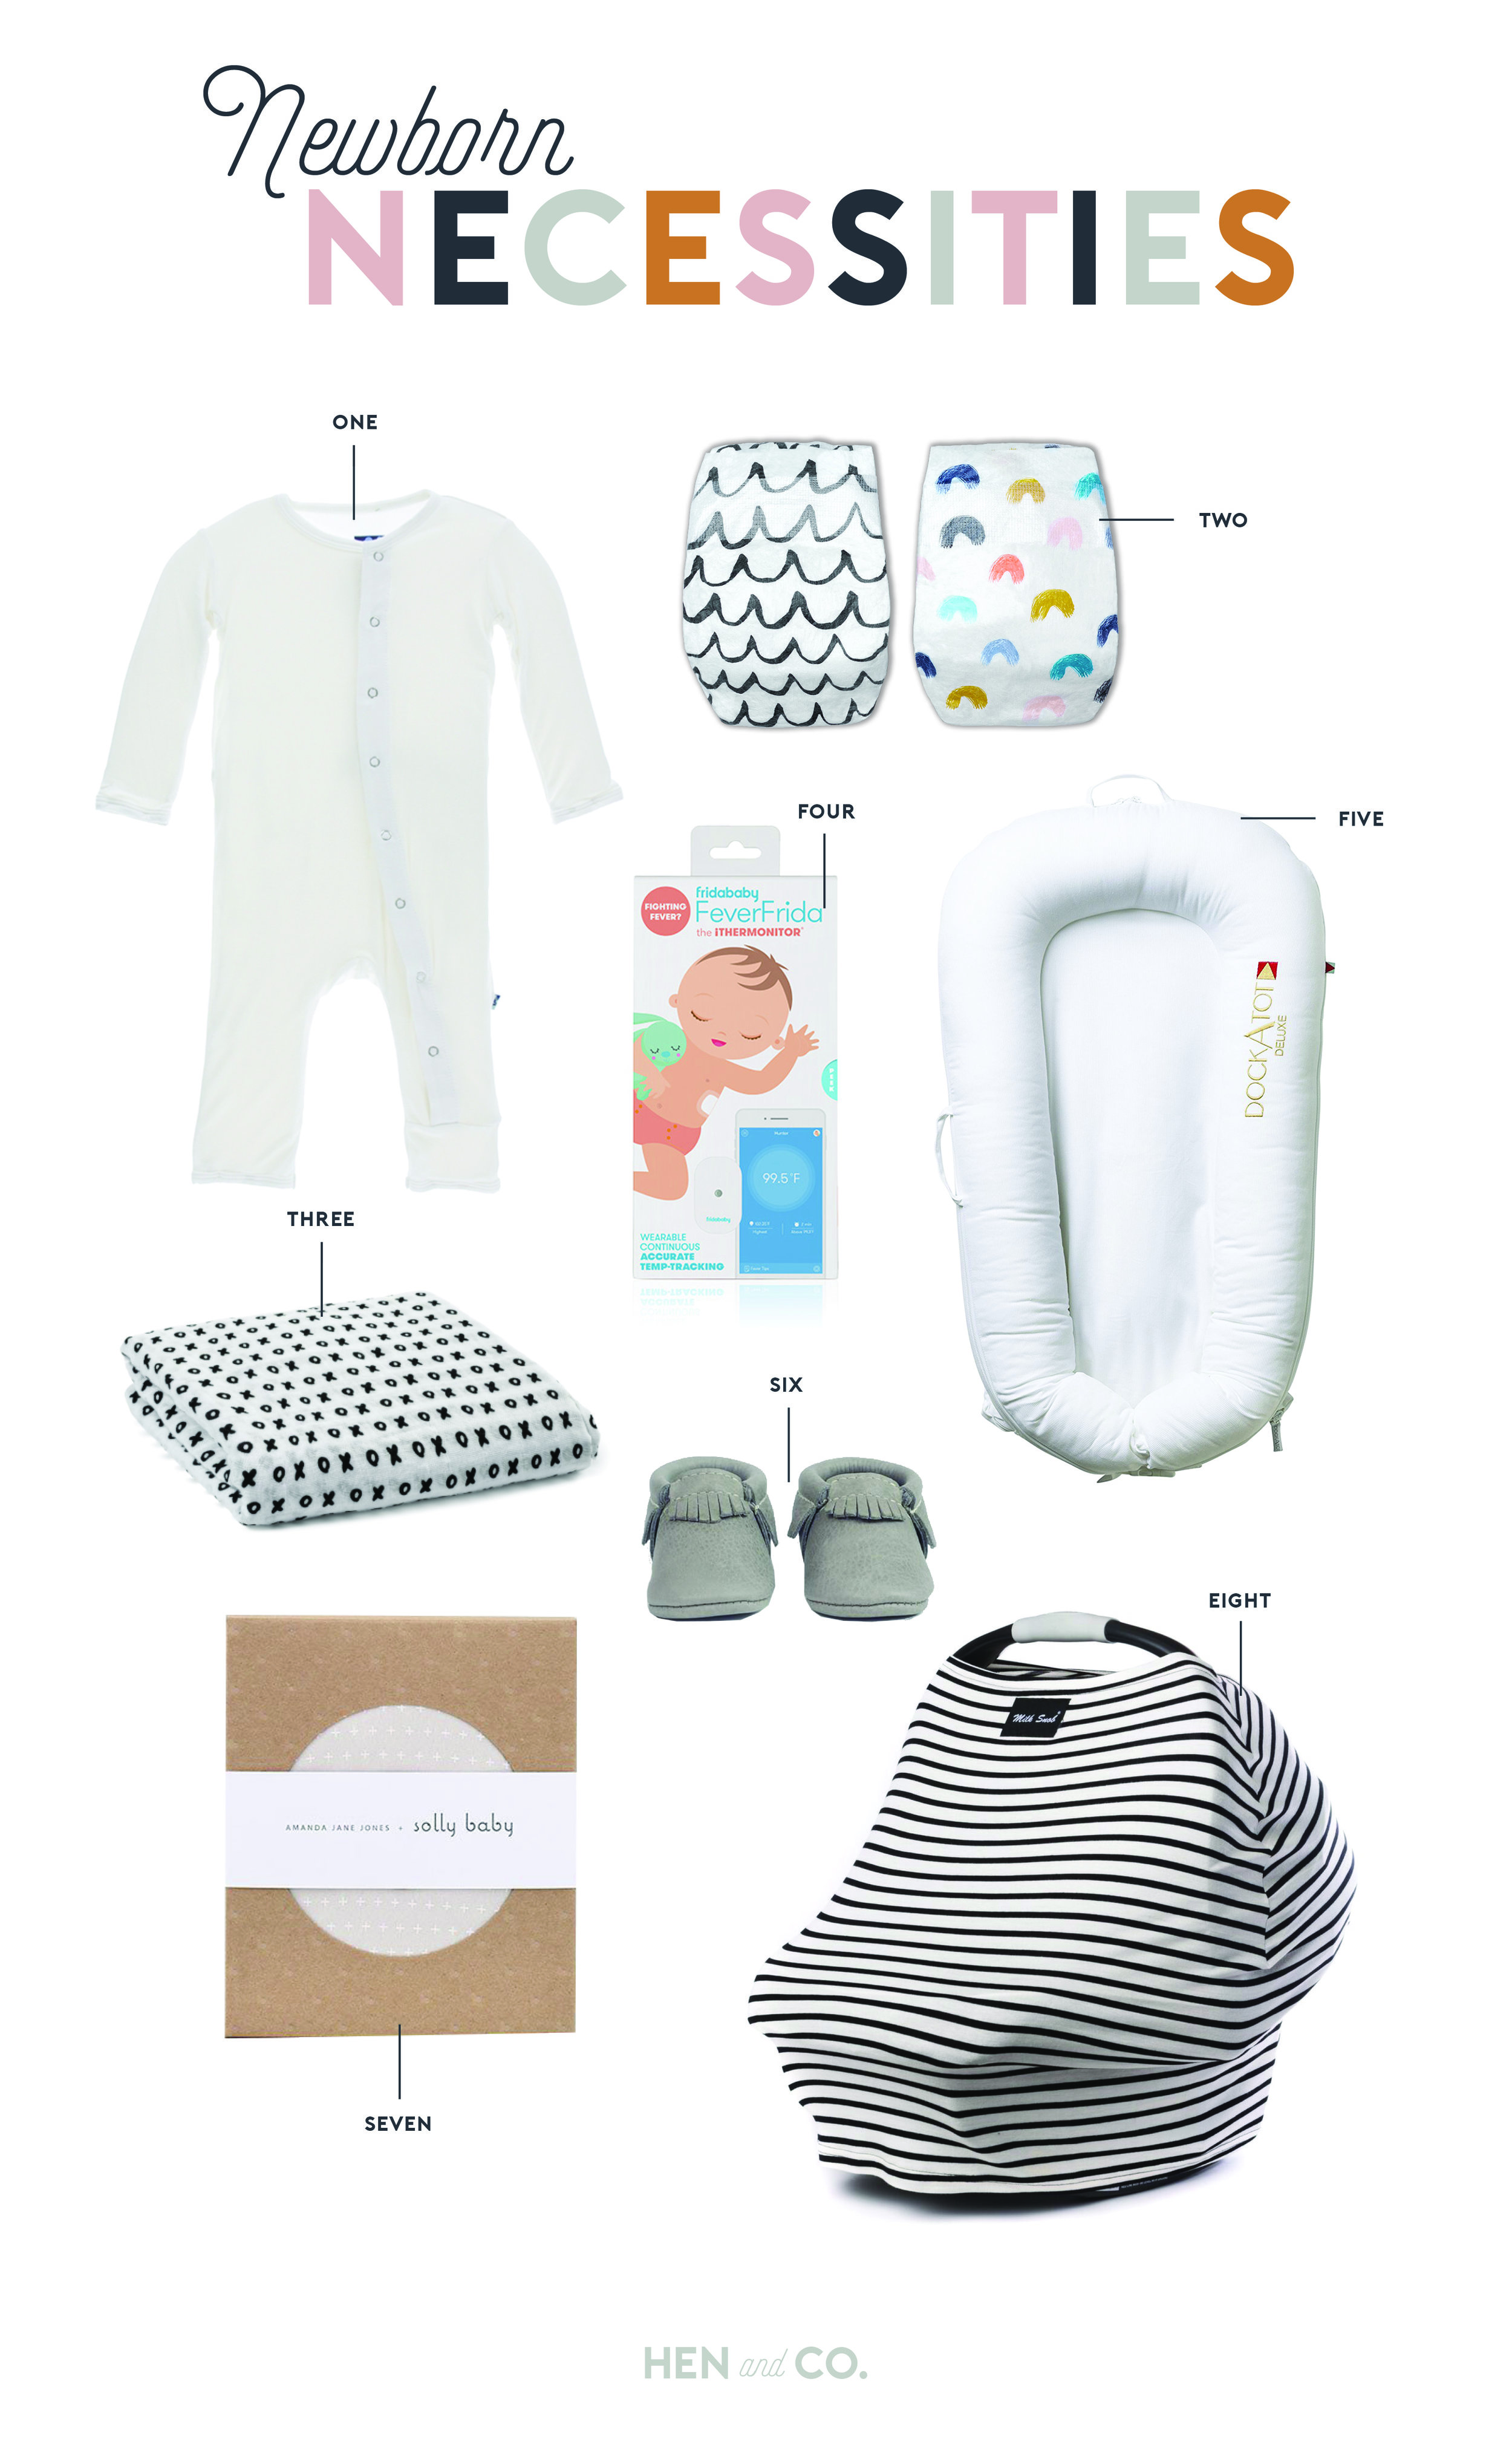 Newborn Necessities for the 4th Baby — kendra — for now.